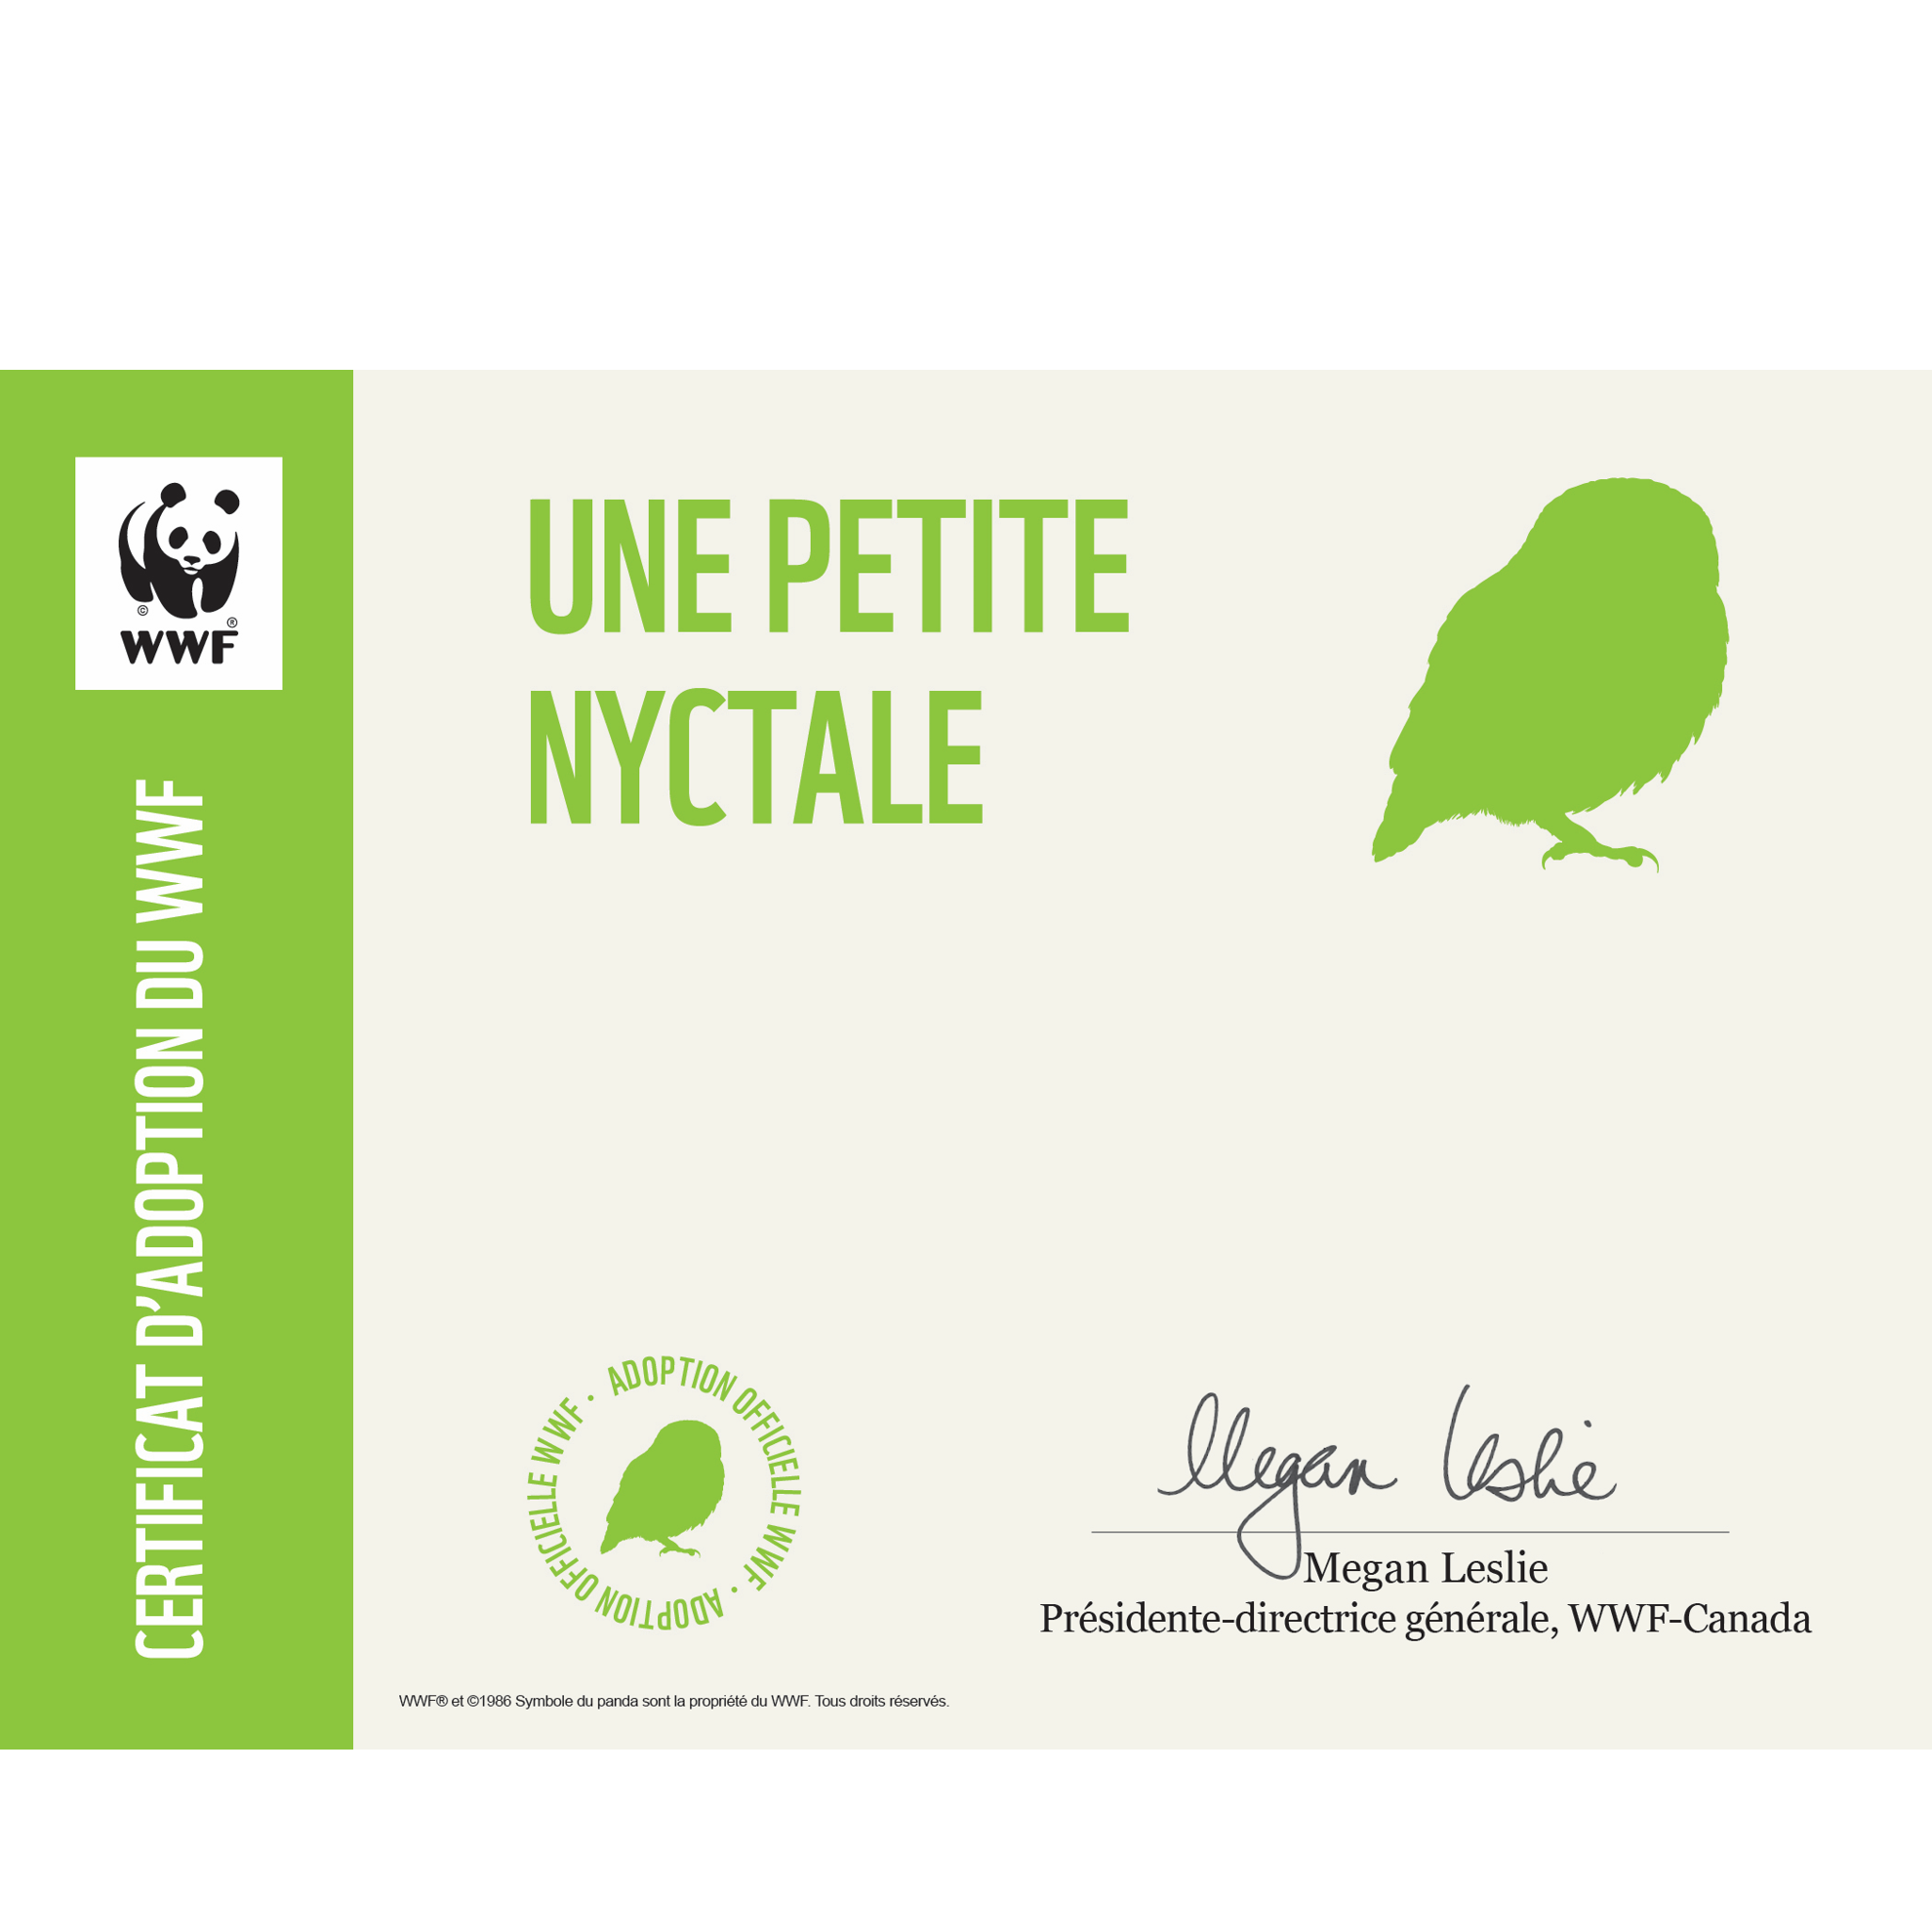 Petite nyctale - WWF-Canada